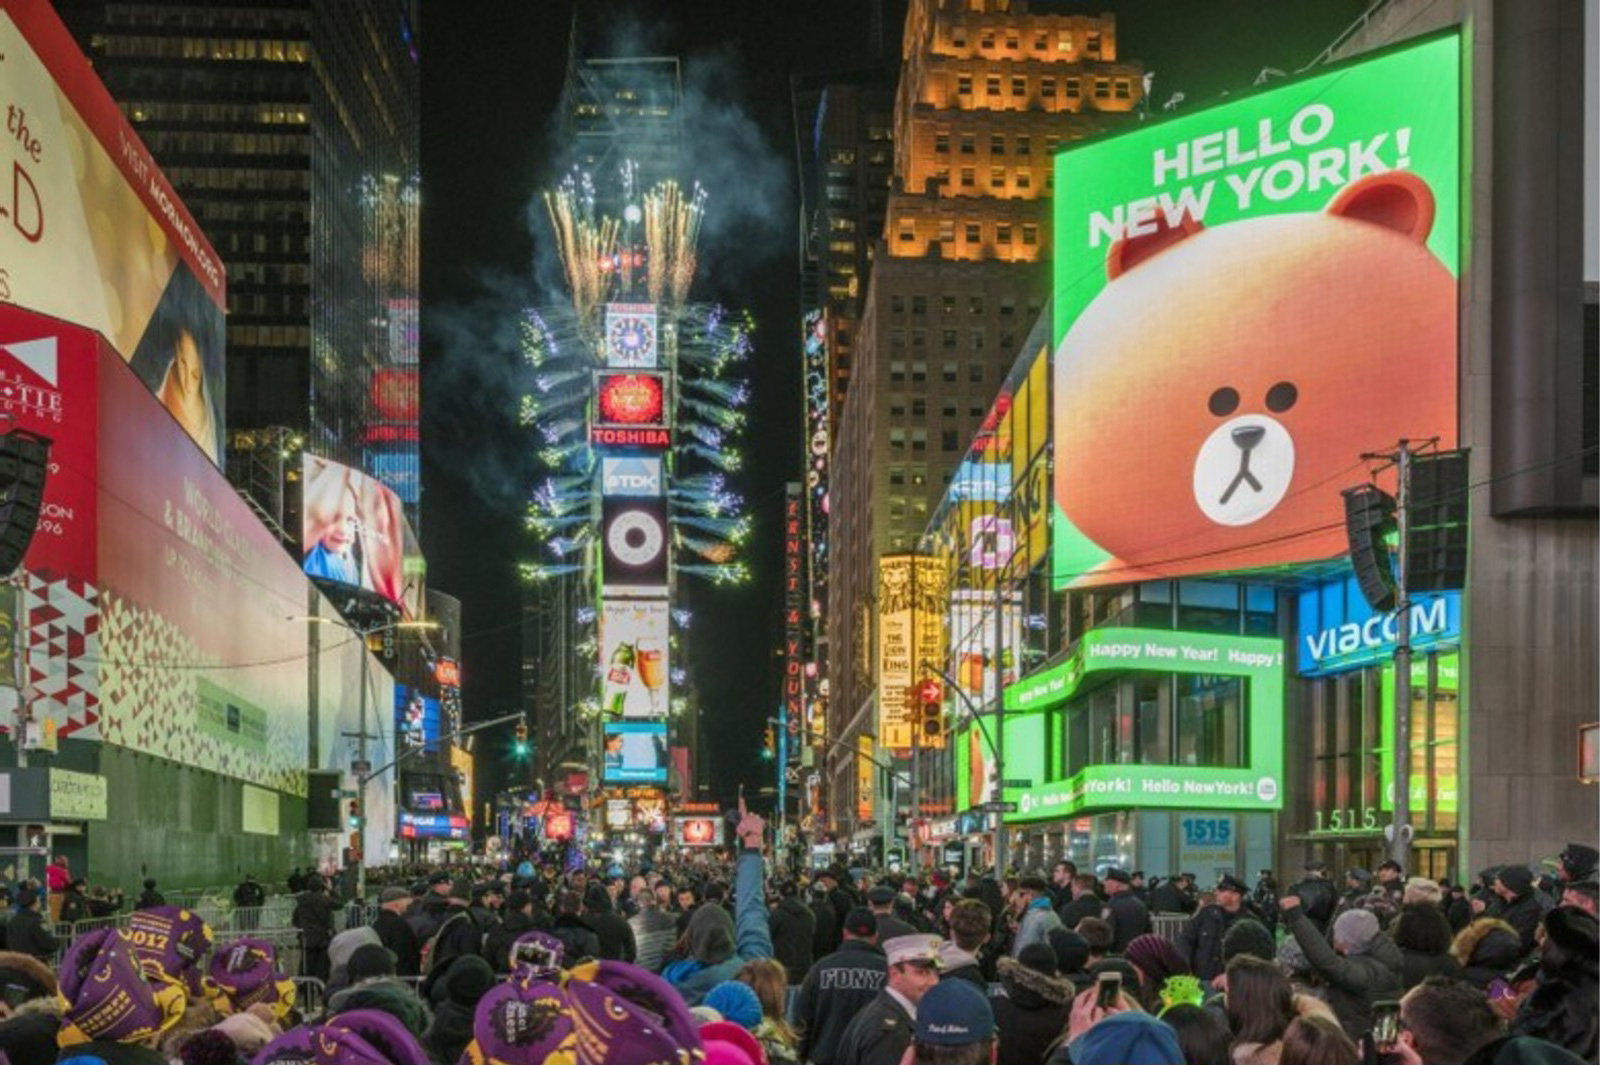 LINE FRIENDS, a global character brand, will open its first official U.S. store (430 square meters) this July in Times Square, New York City